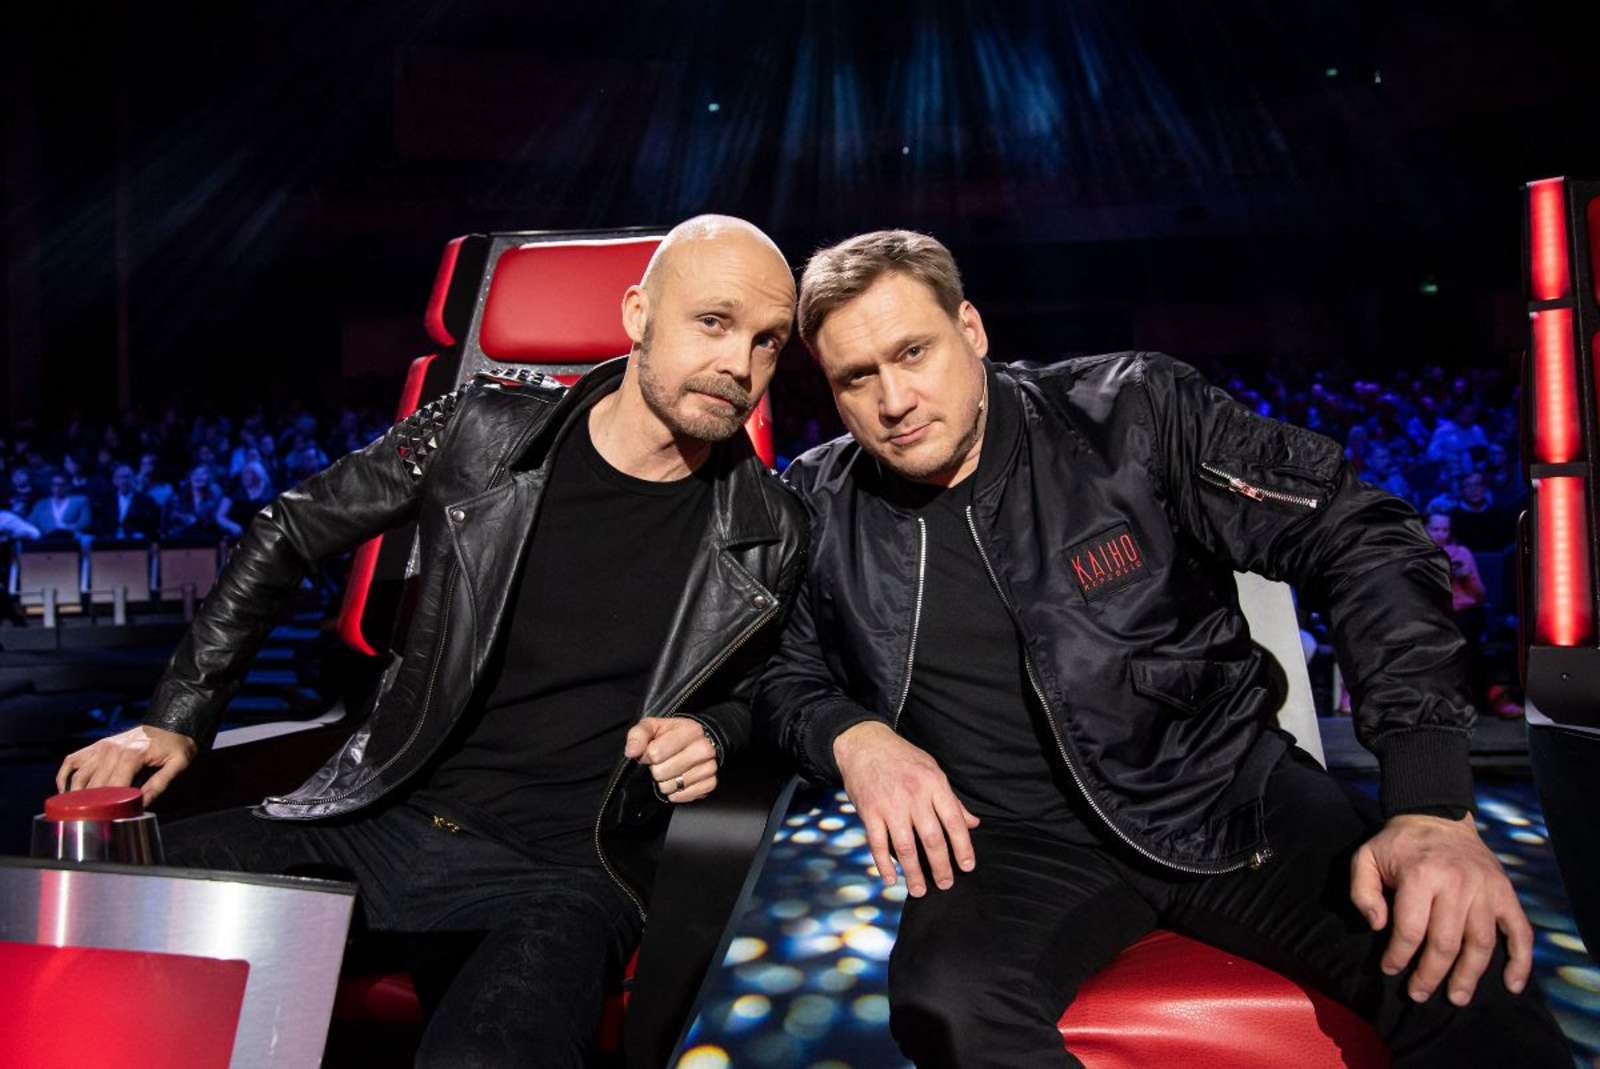 The Voice of Finland 